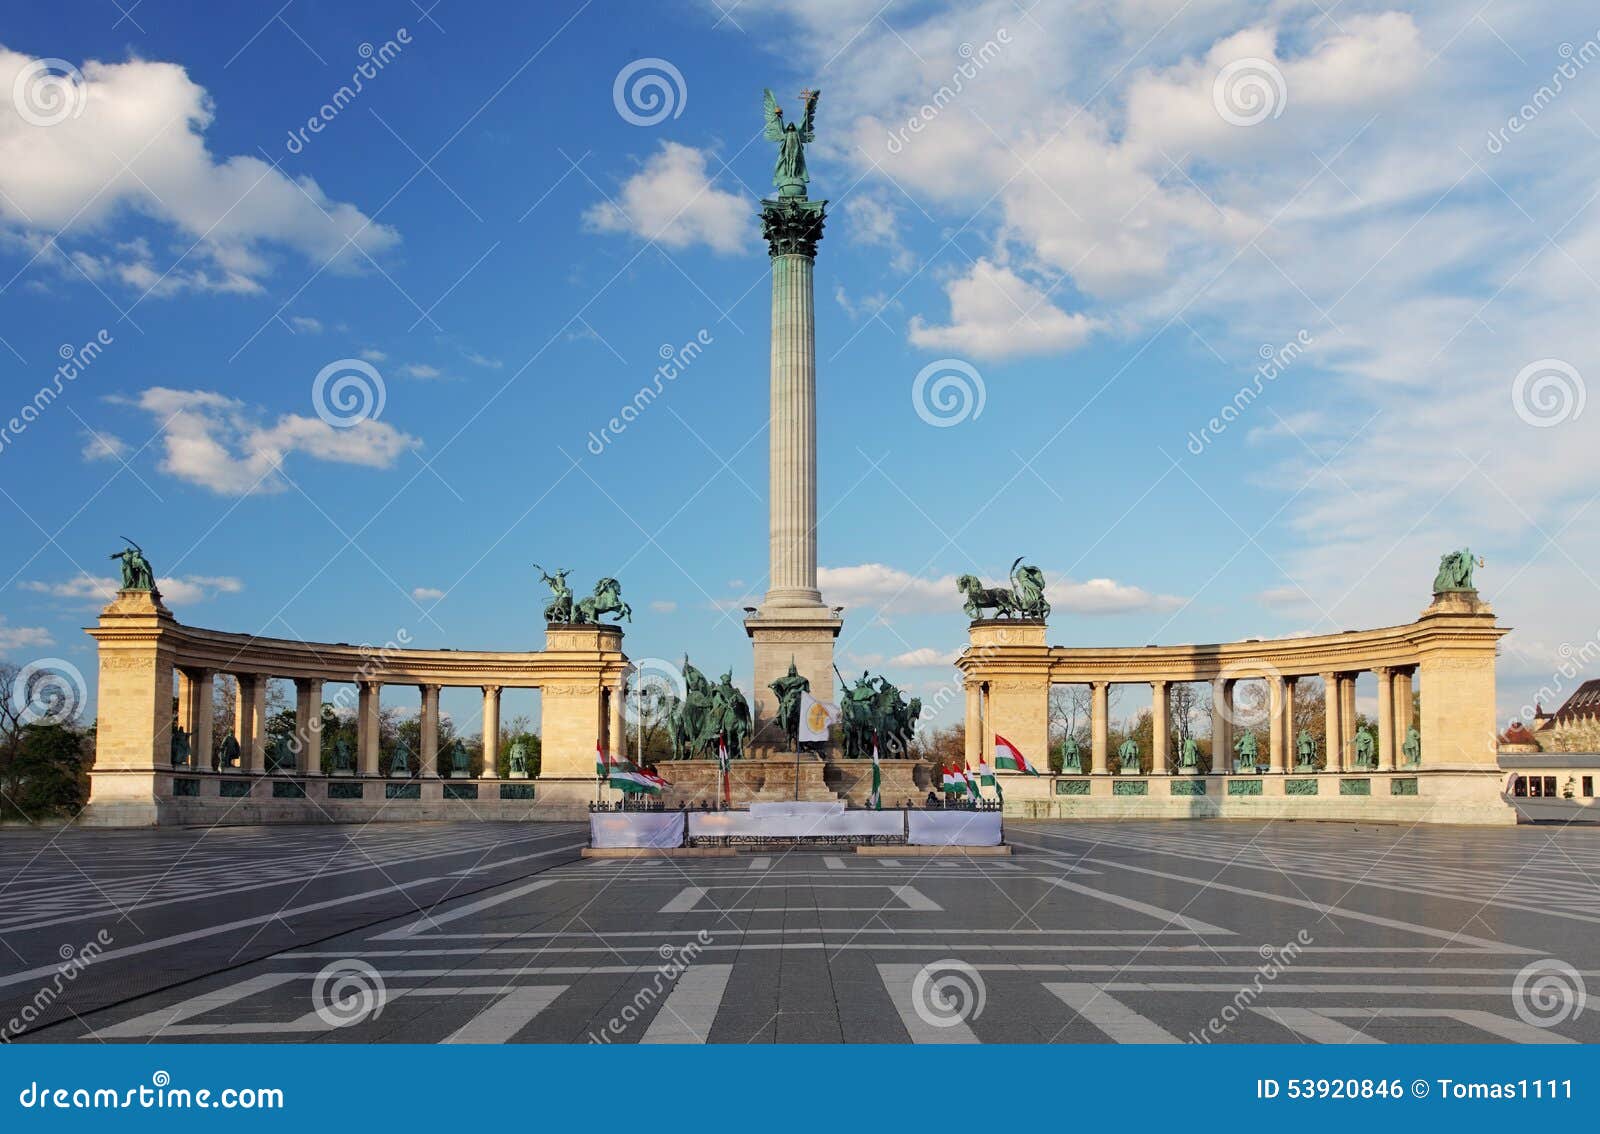 heroes square in budapest, hungary